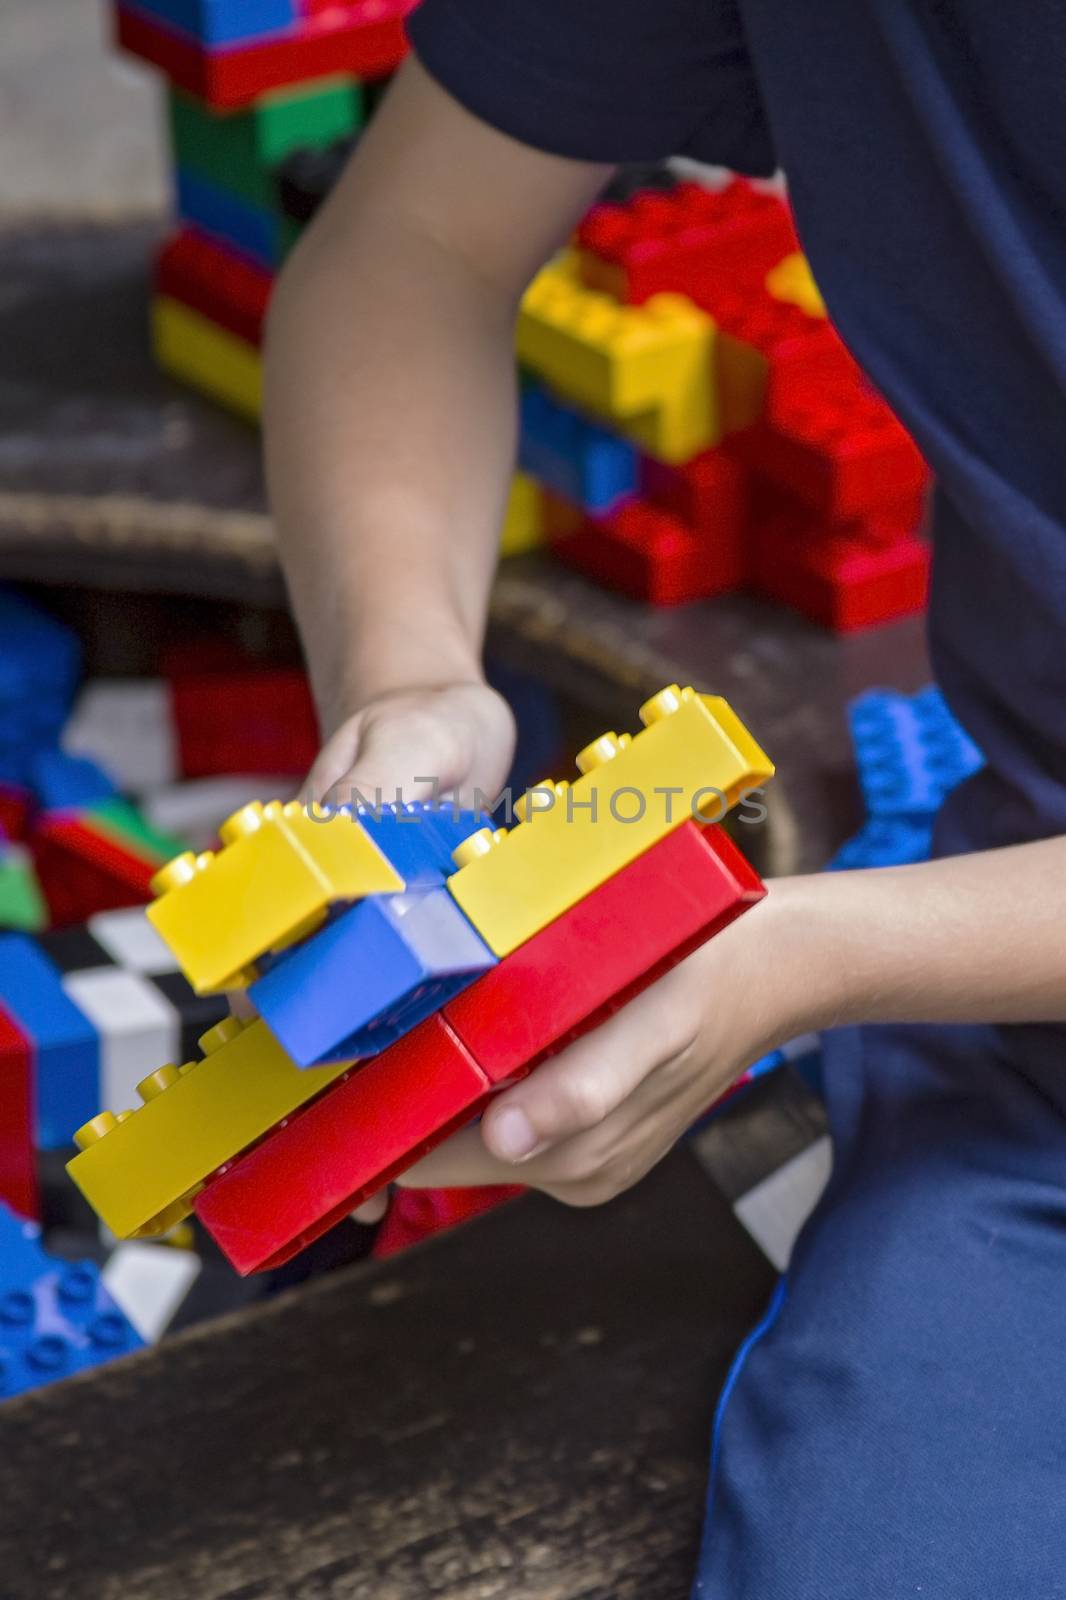 Closeup of child's hands with colorful plastic bricks of lego. by Anelik